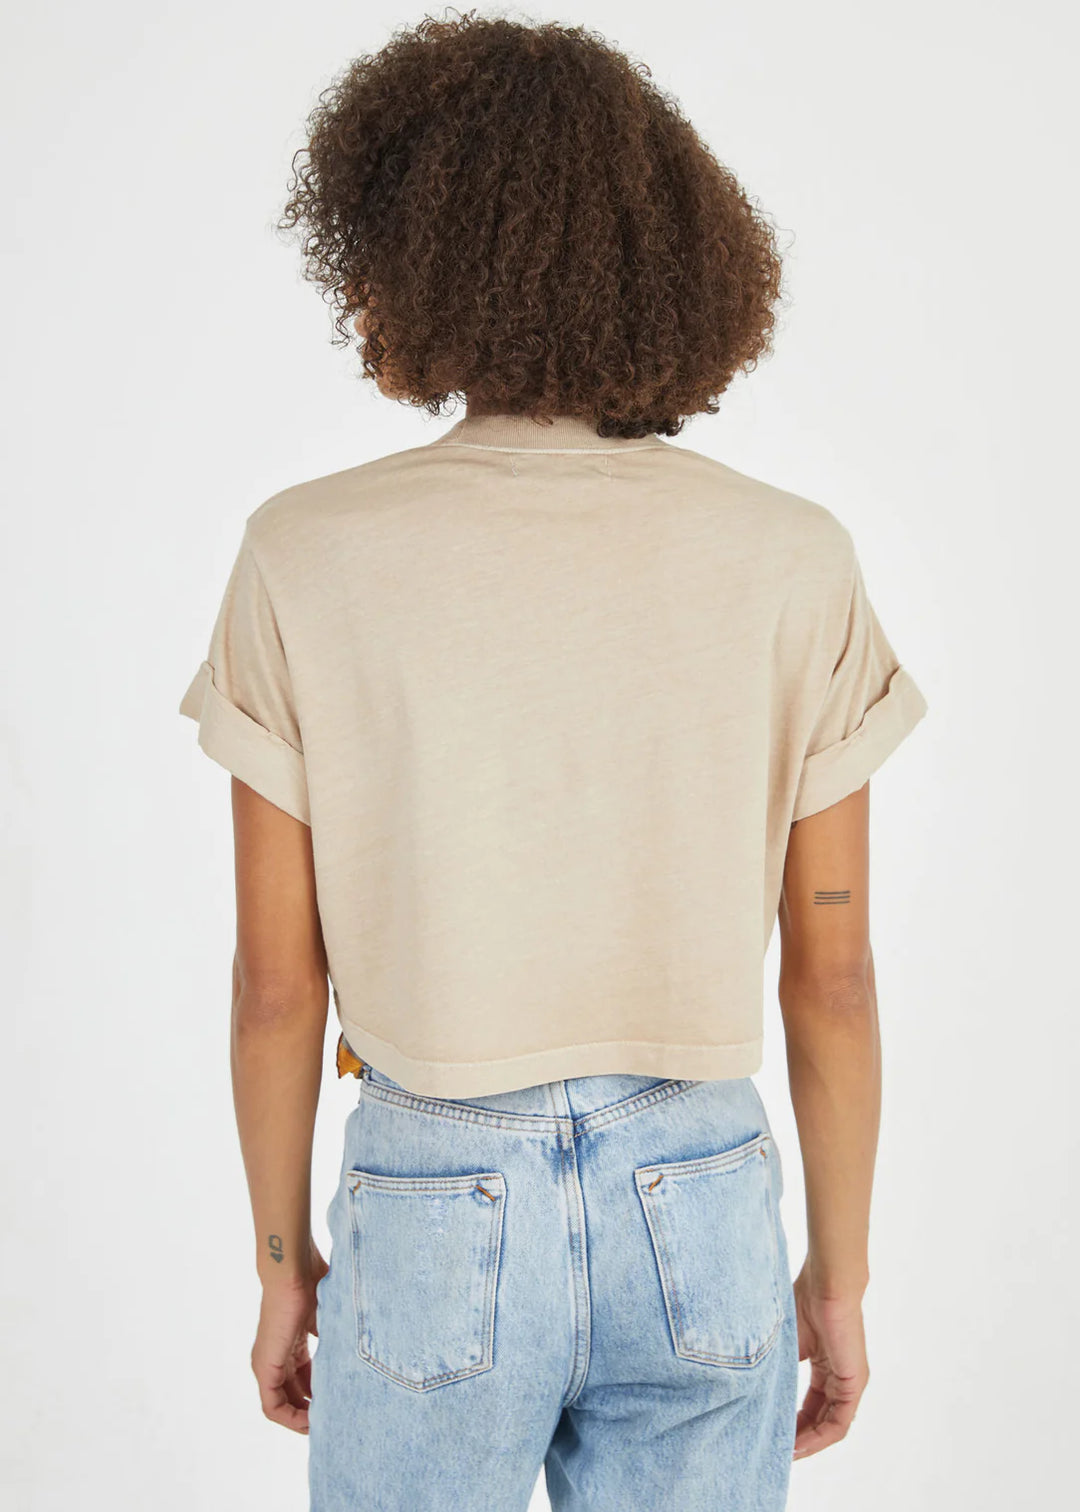 Upgrade your wardrobe with the Heart and Soul Crop Boyfriend Graphic Tee from Girl Dangerous. Made from 100% cotton, this premium sand-colored tee is pigment dyed for a vintage look. Featuring hand grinded edges and rolled sleeves, this oversized "boyfriend" style tee offers a soft and high quality feel. With a cropped fit, this tee is perfect for everyday wear. Model is wearing size small.